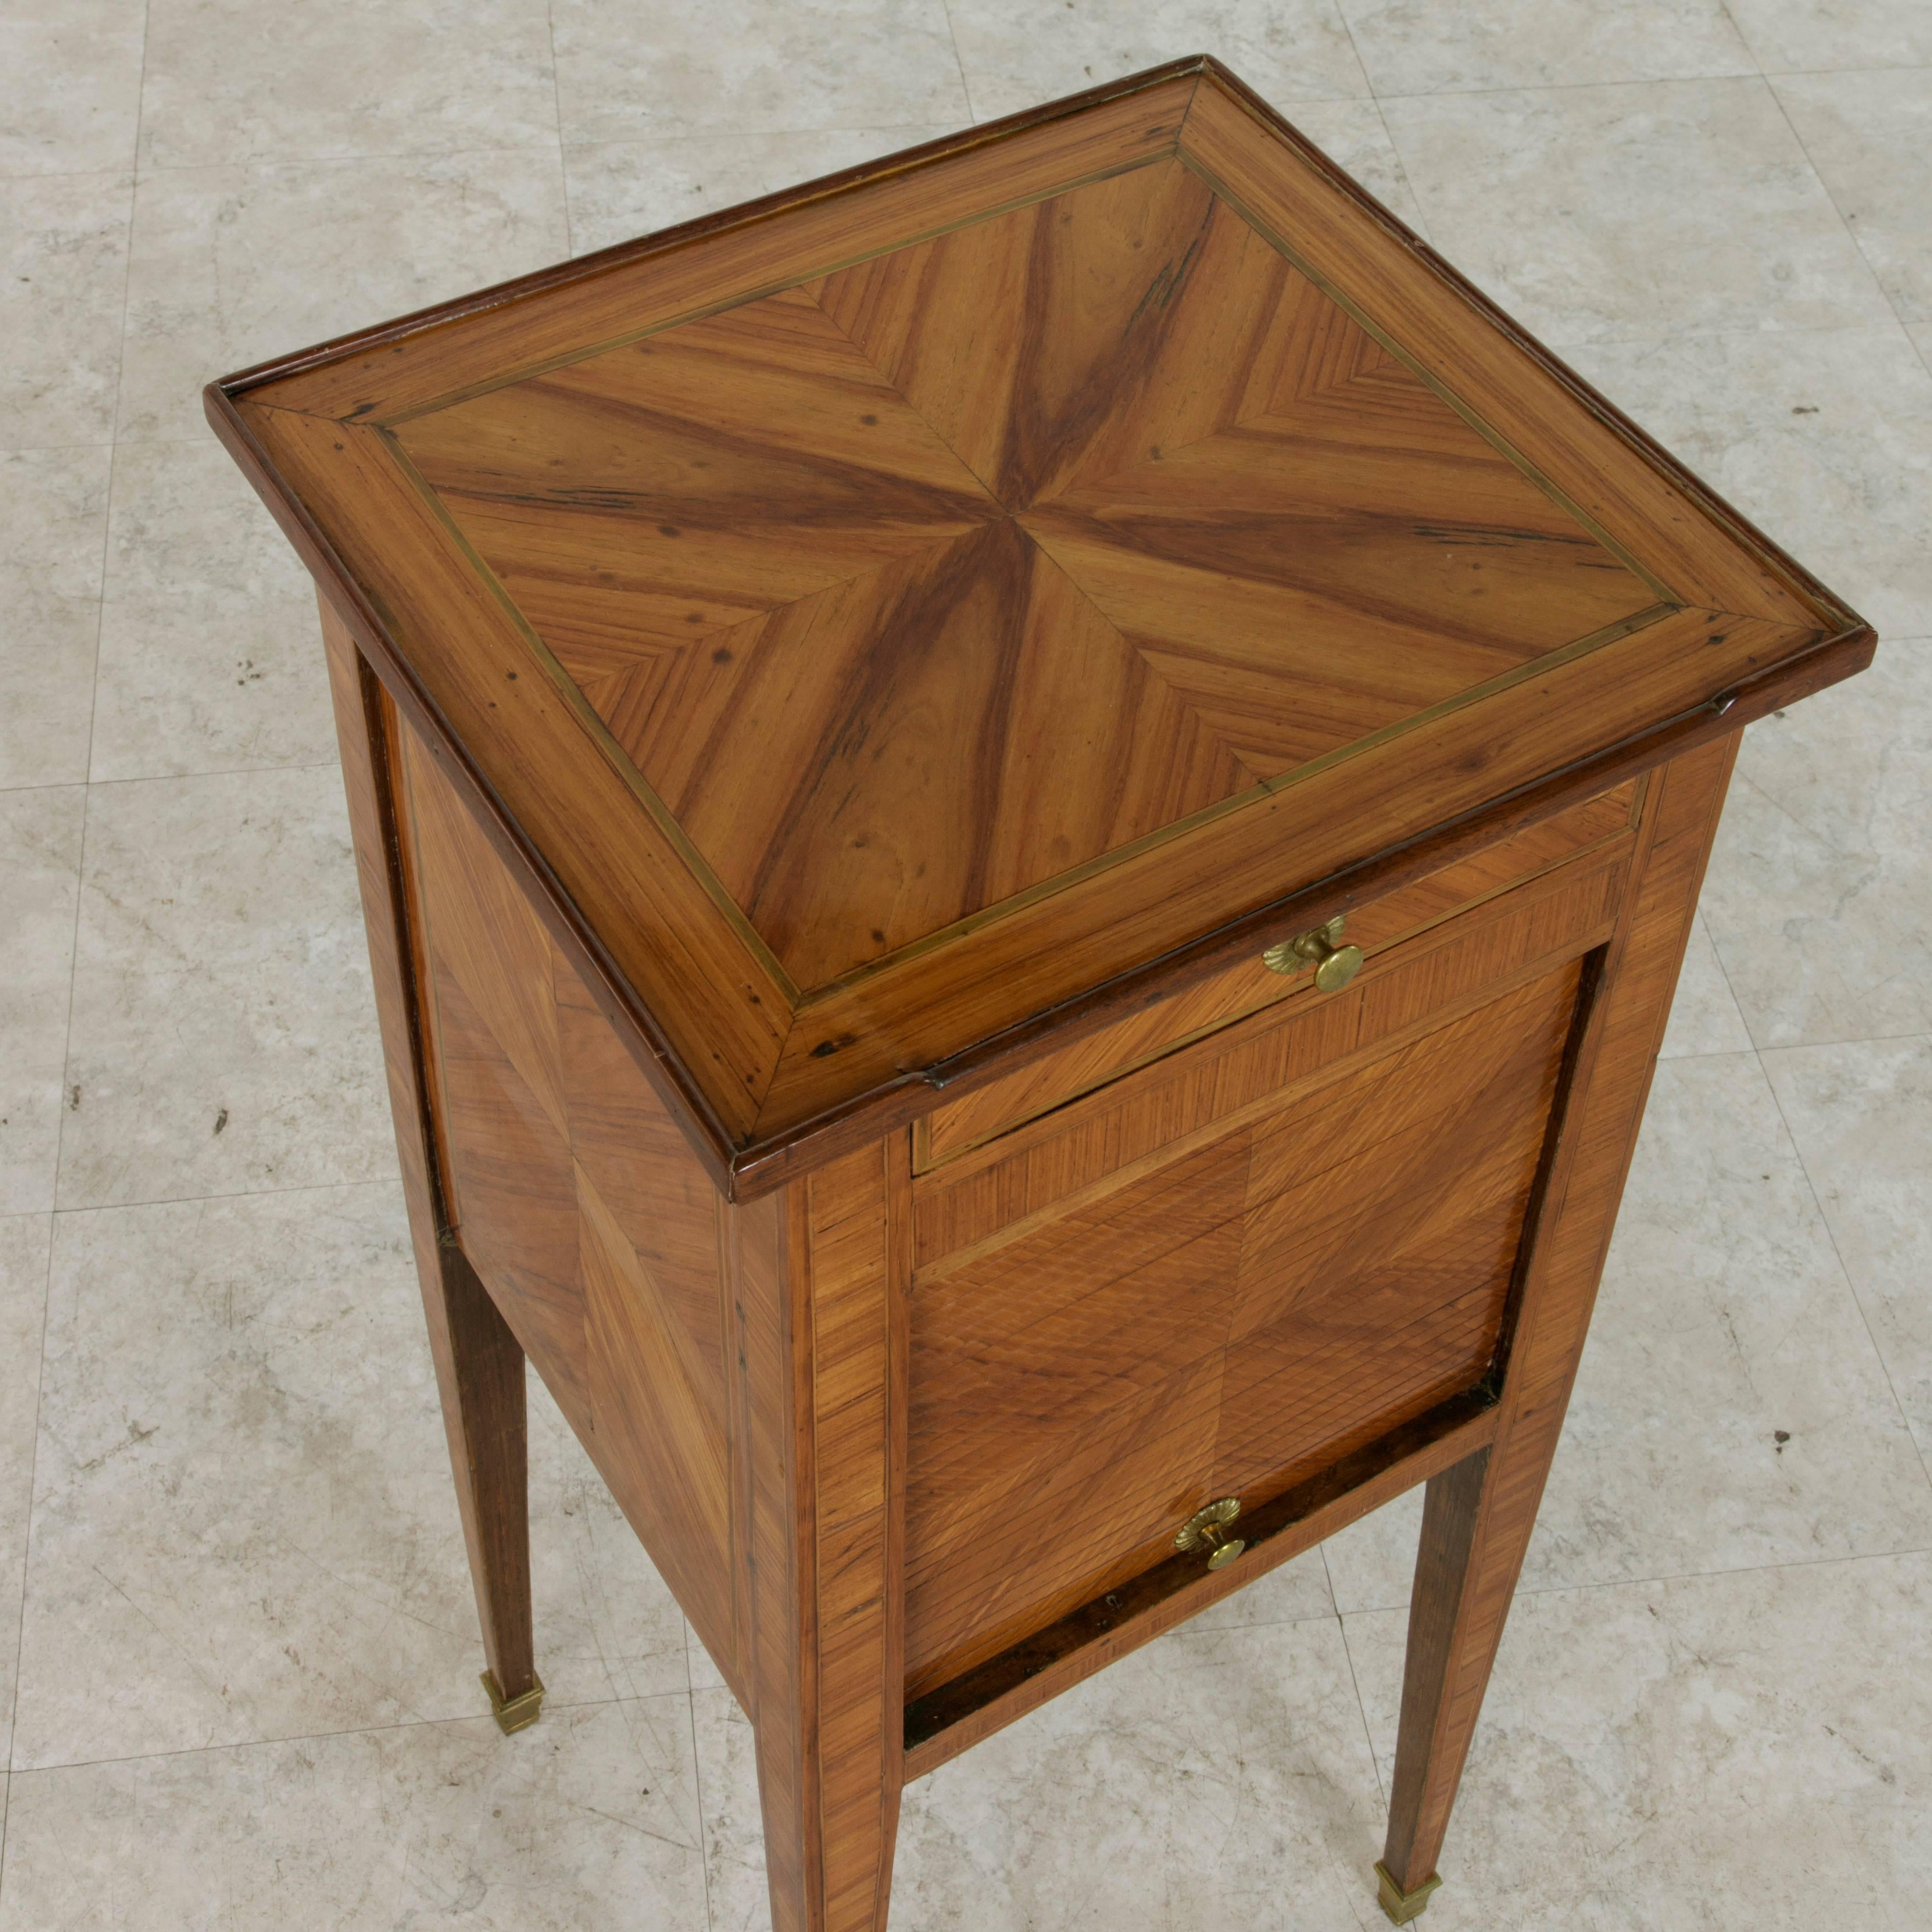 This eighteenth century Louis XVI period side table or nightstand is finished on all sides with exquisite book-matched rosewood marquetry detailed with fine lines of inlaid sycamore that frame the top and sides. Bronze sabots finish the tapered